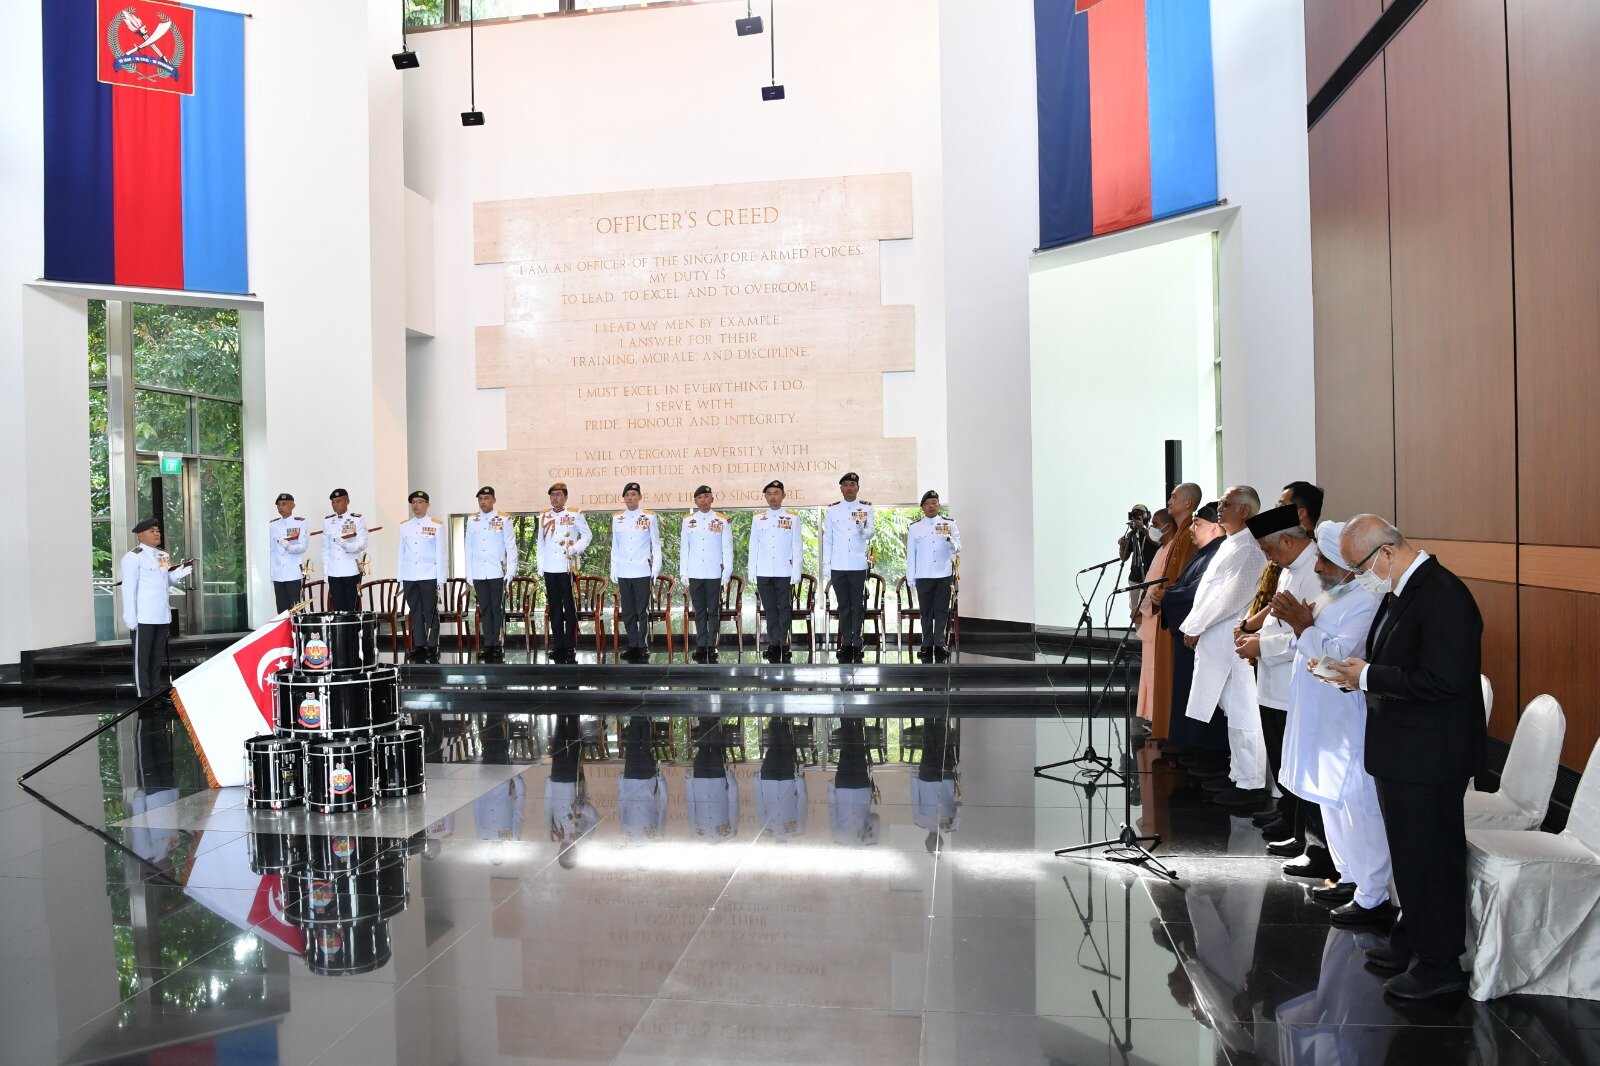 A ceremony was held at the SAFTI Military Institute's Ceremonial Hall prior to the parade for the consecration of the DIS colours.